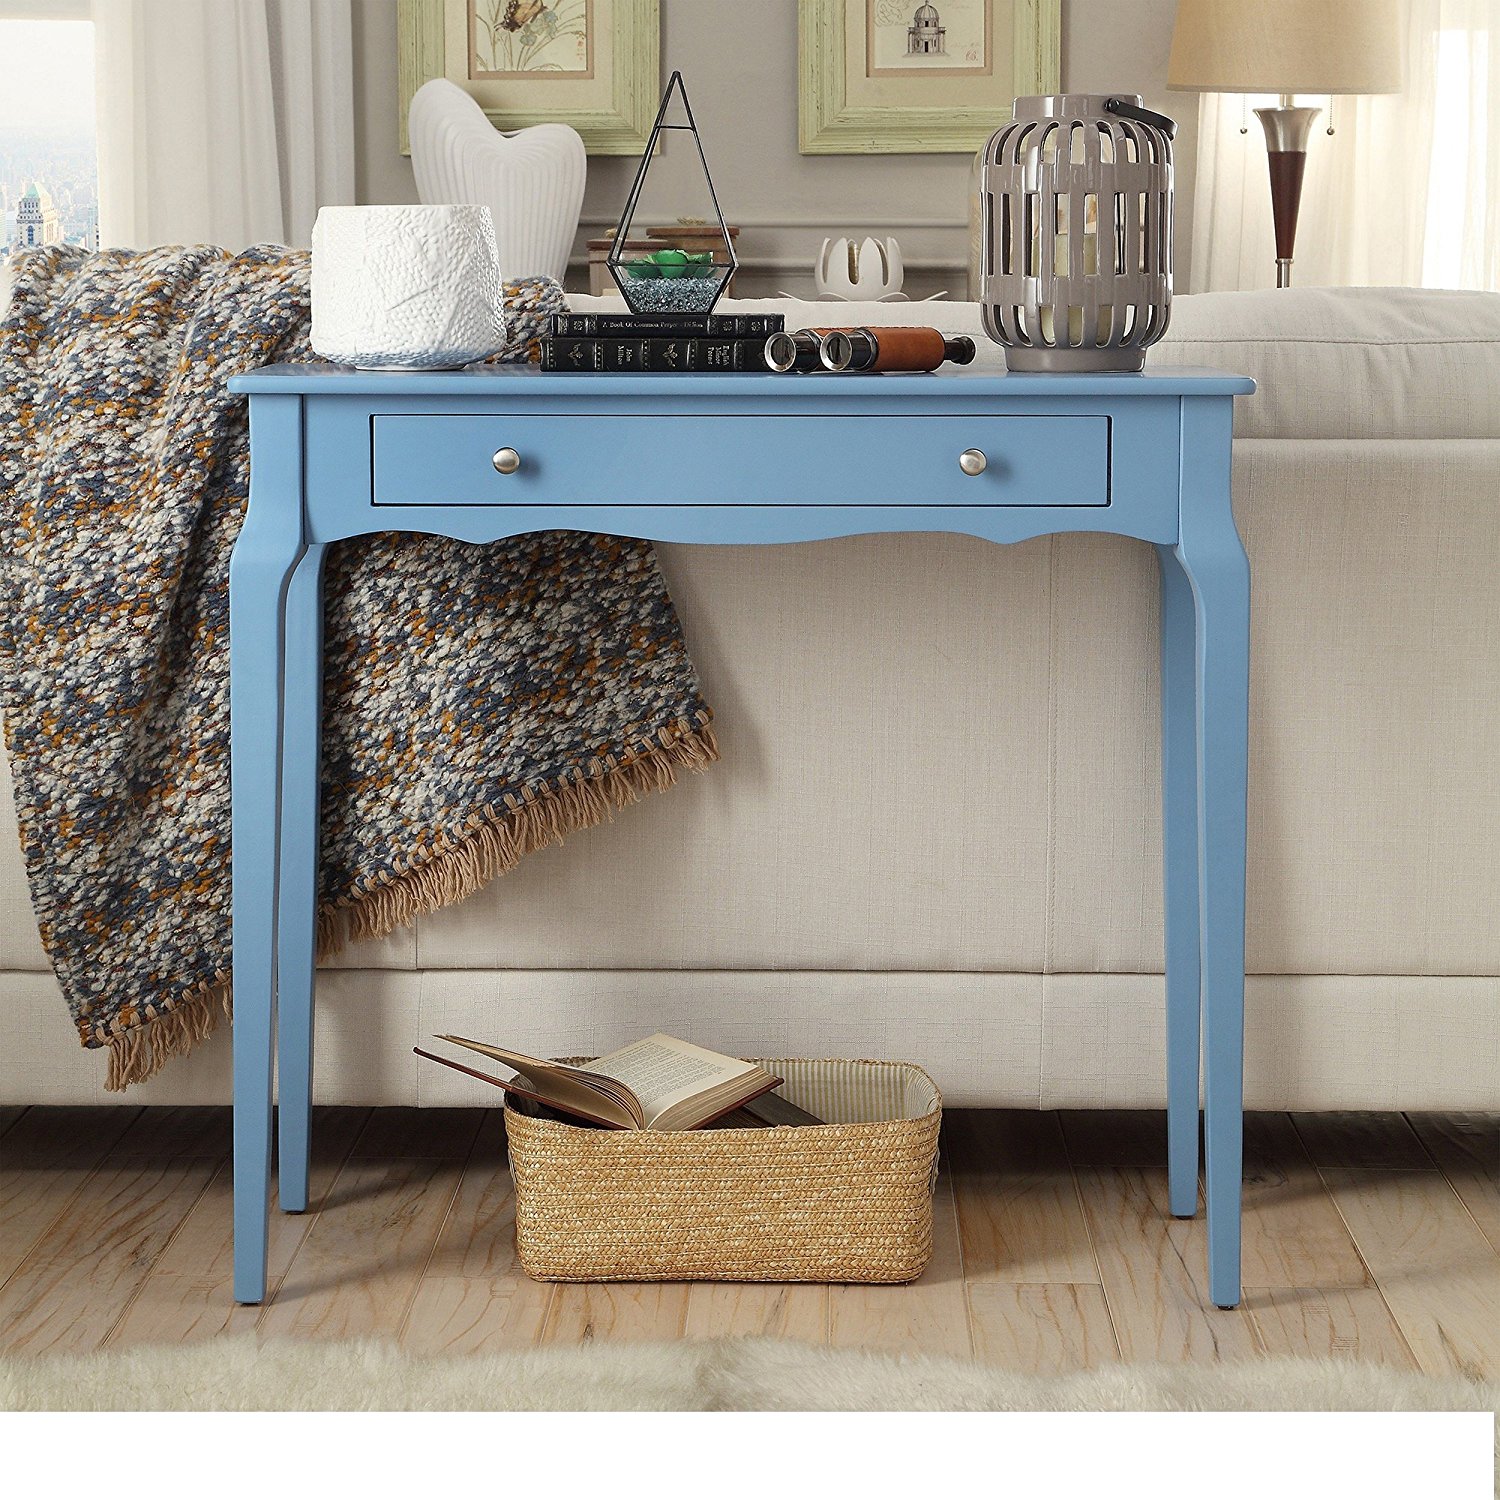 Modern Cottage Wood Narrow End Sofa Console Accent Table with Storage Drawer - Includes Modhaus Living Pen (Sky Blue)